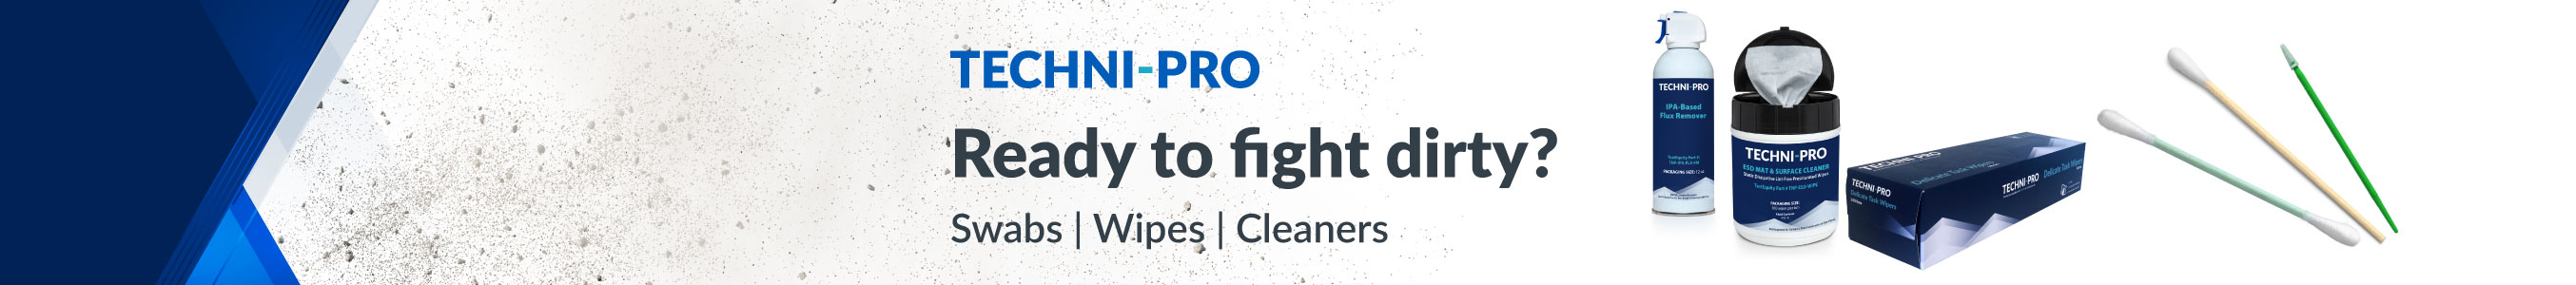 Techni-Pro Cleaners, WIpes & Swabs